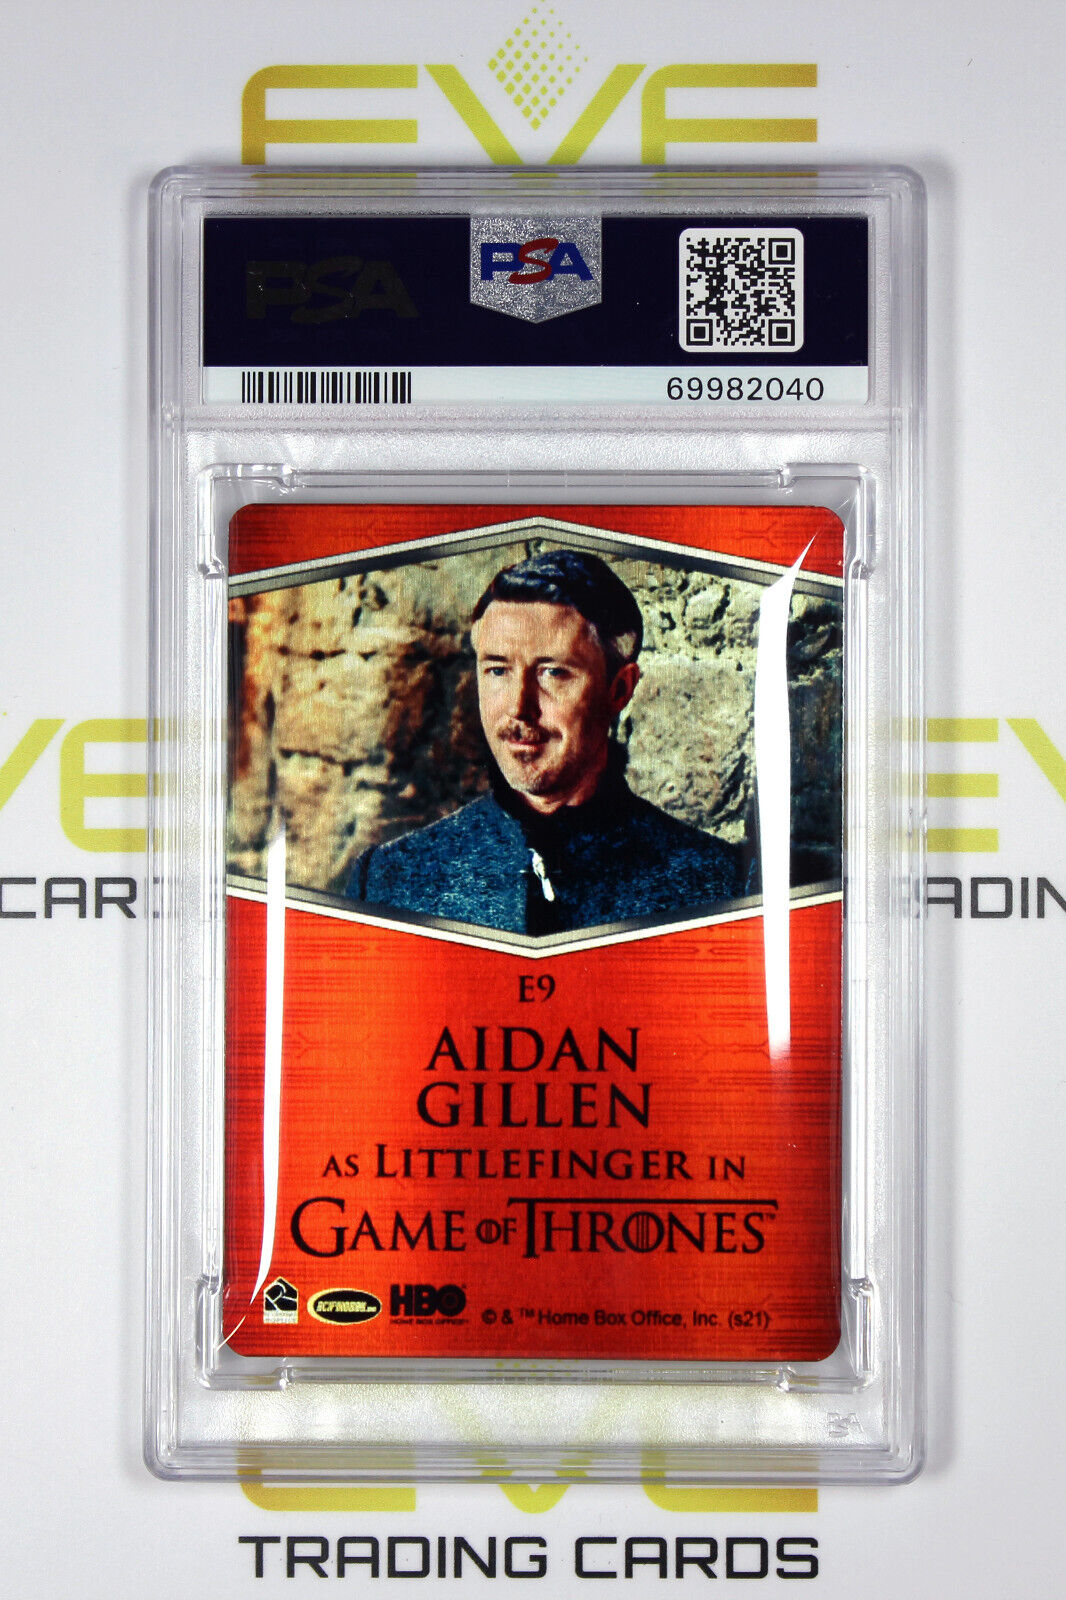 Graded Game of Thrones Card - #E9 2021 Littlefinger - Expressions - PSA 8